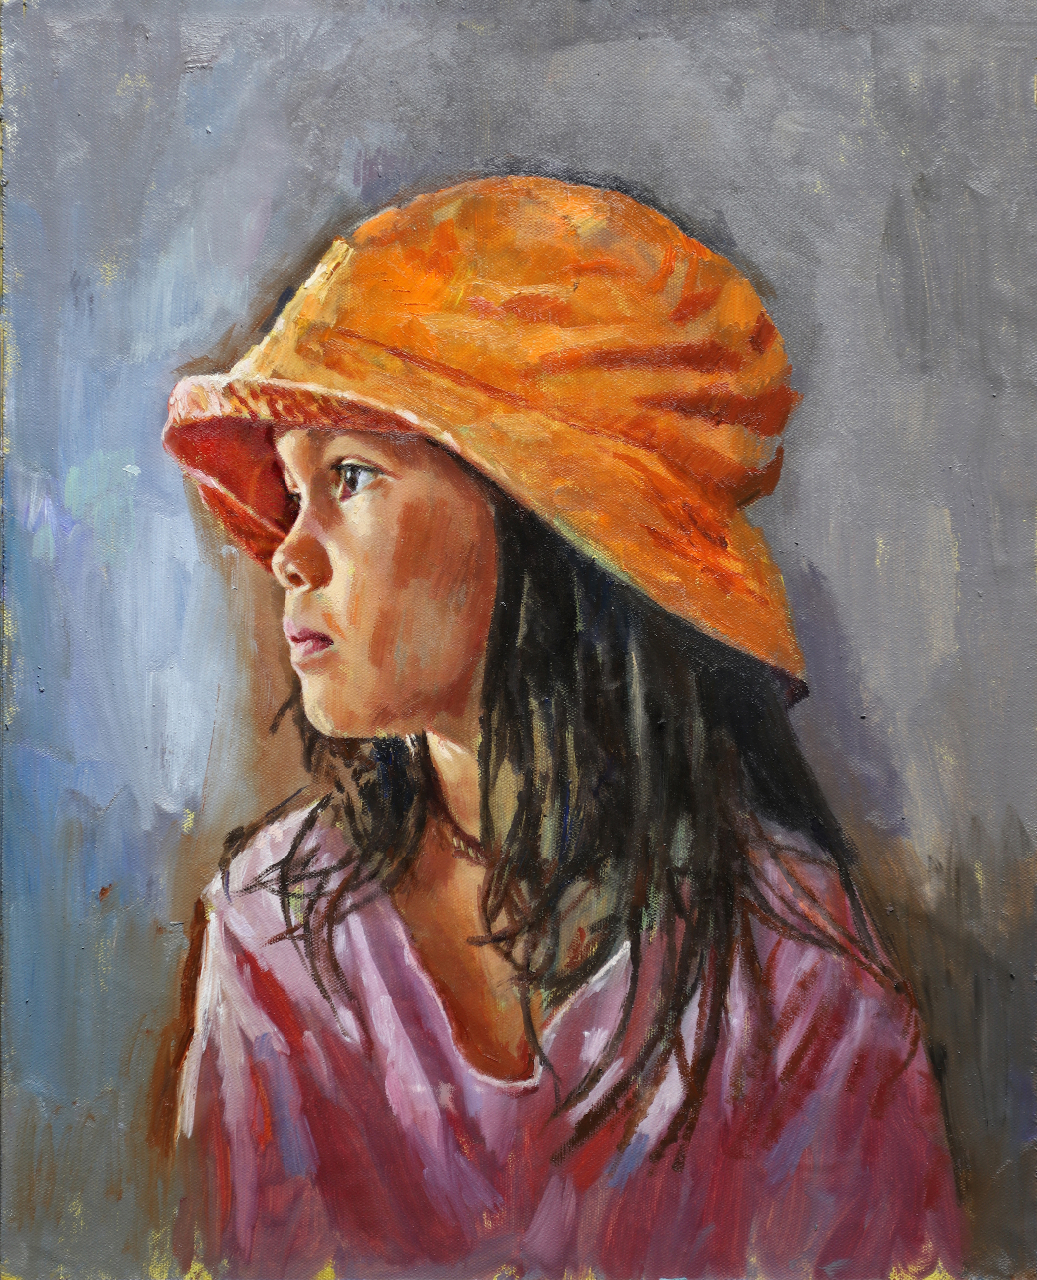 &ldquo;Portrait Painting in Oils of Emilie #7 by Dad&rdquo;